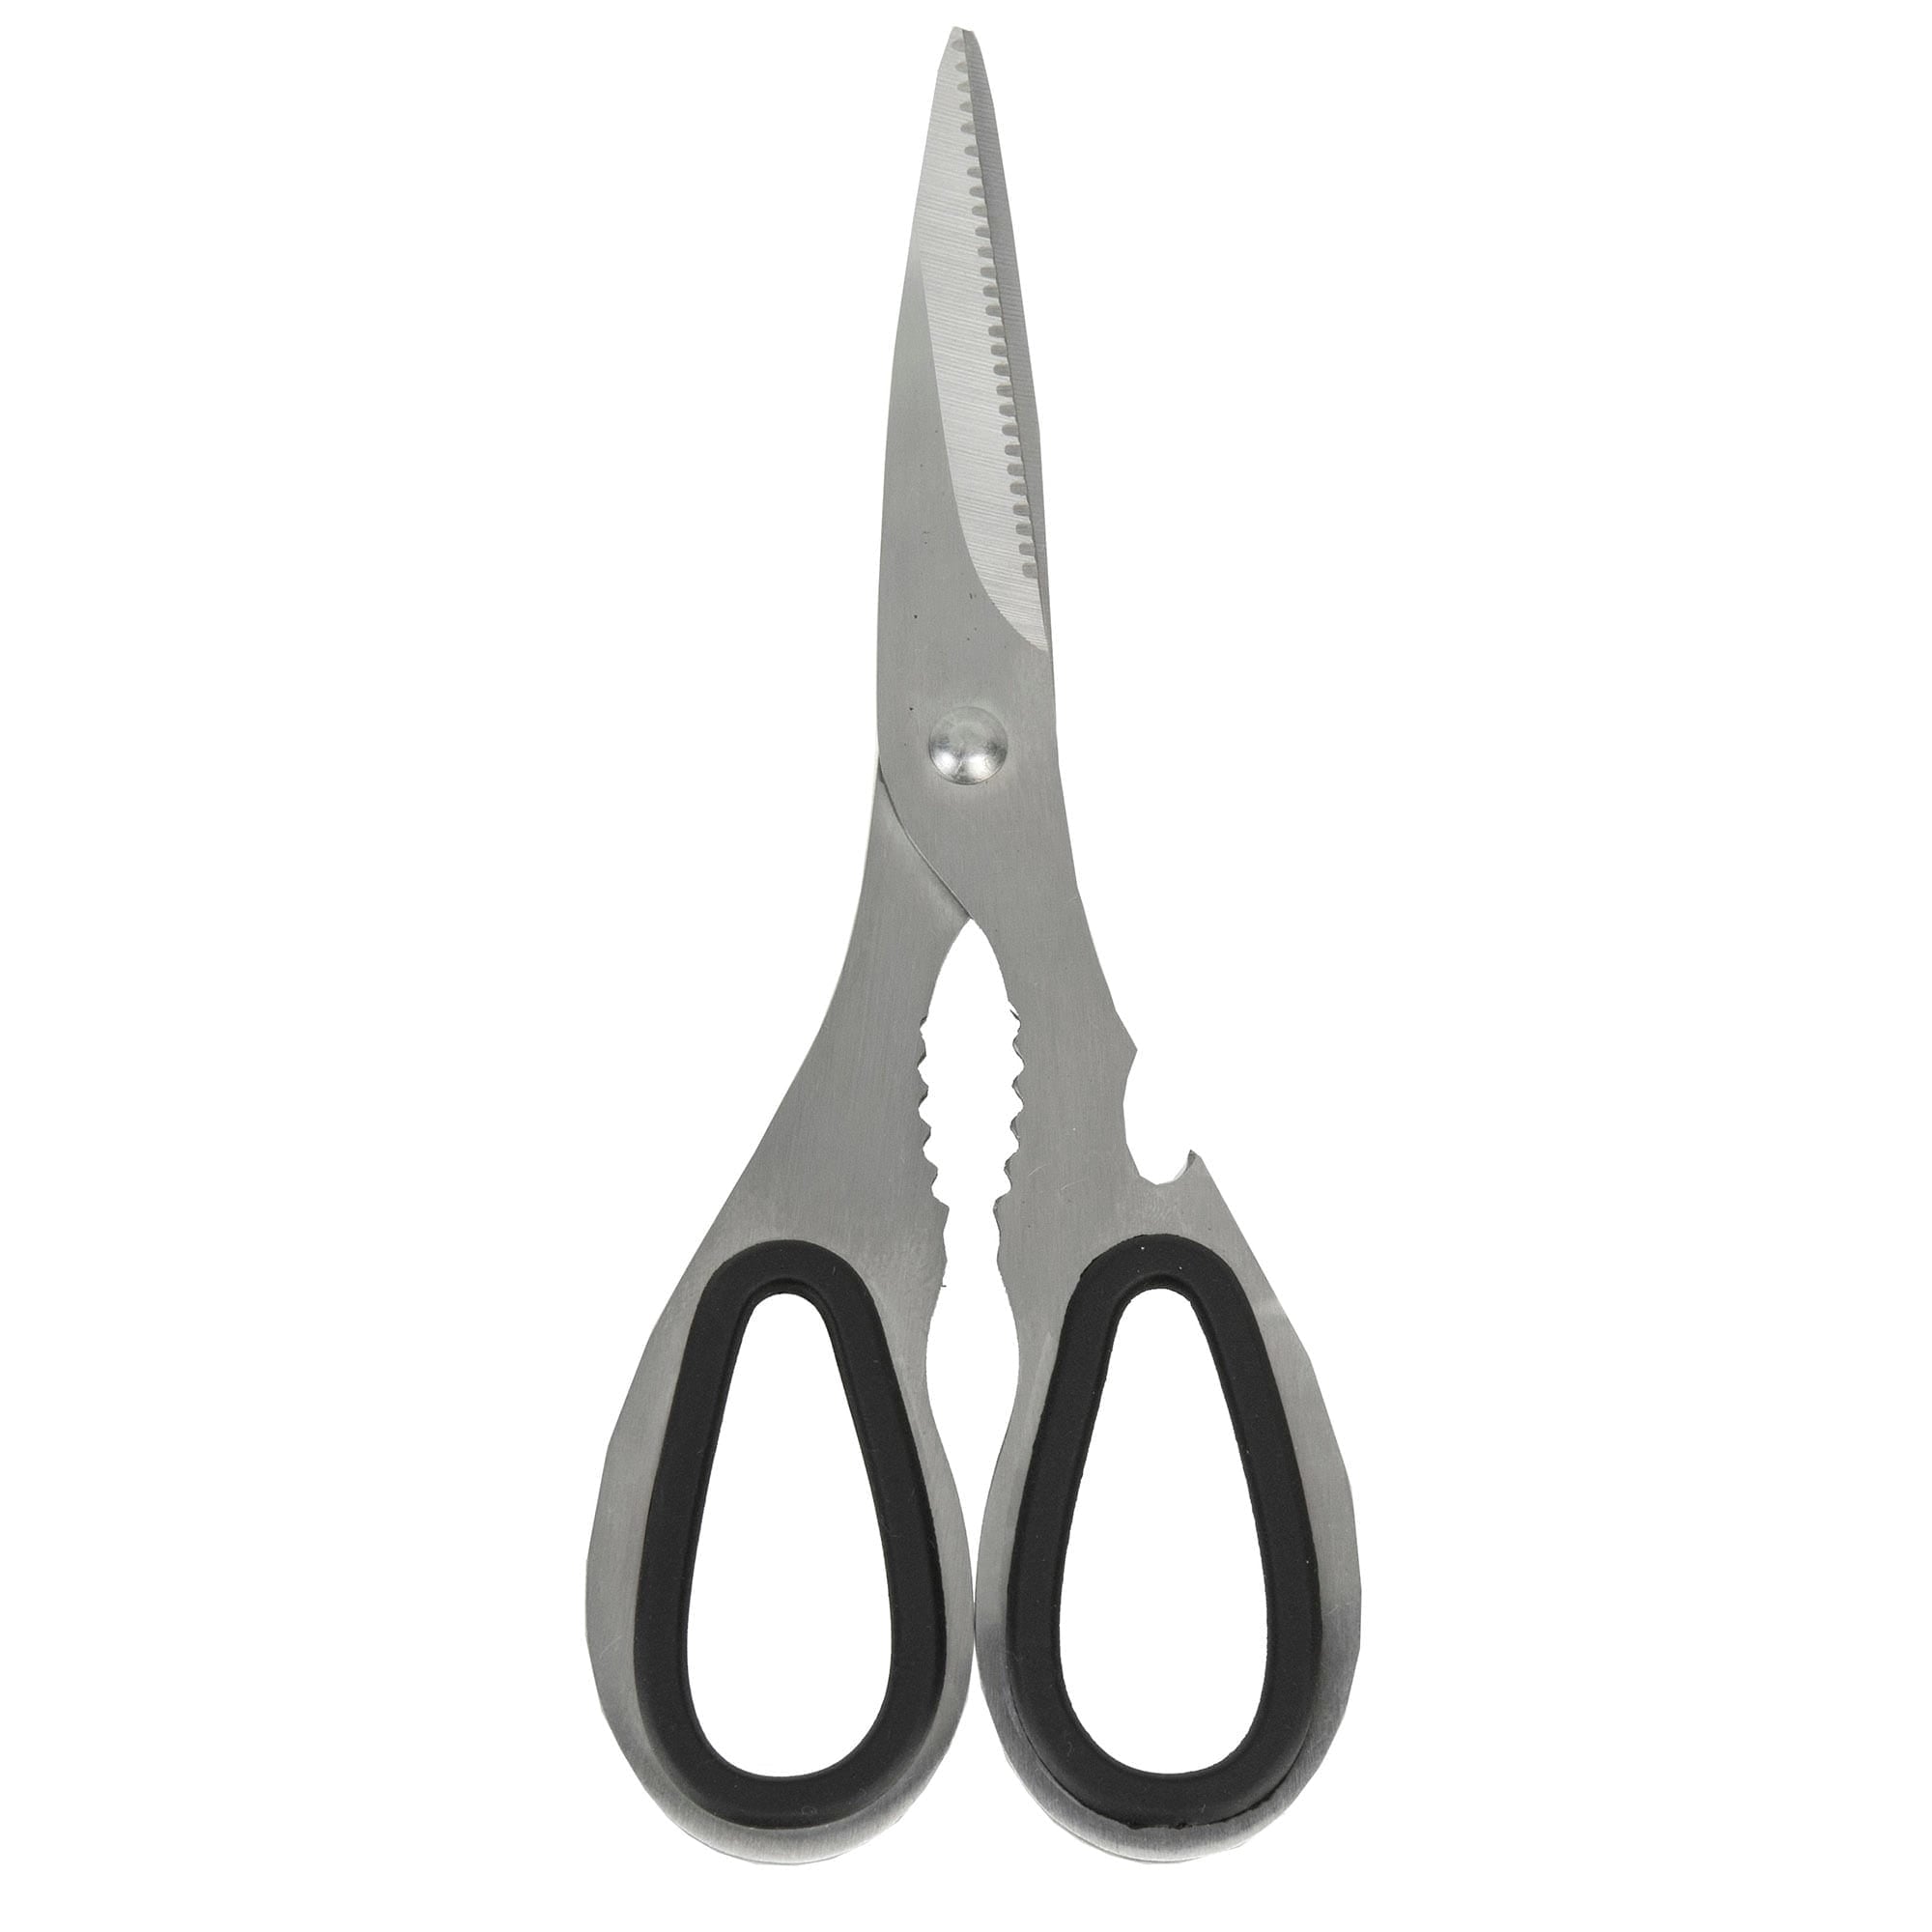 Home Basics Stainless Steel Kitchen Shears, Silver $2.50 EACH, CASE PACK OF 24